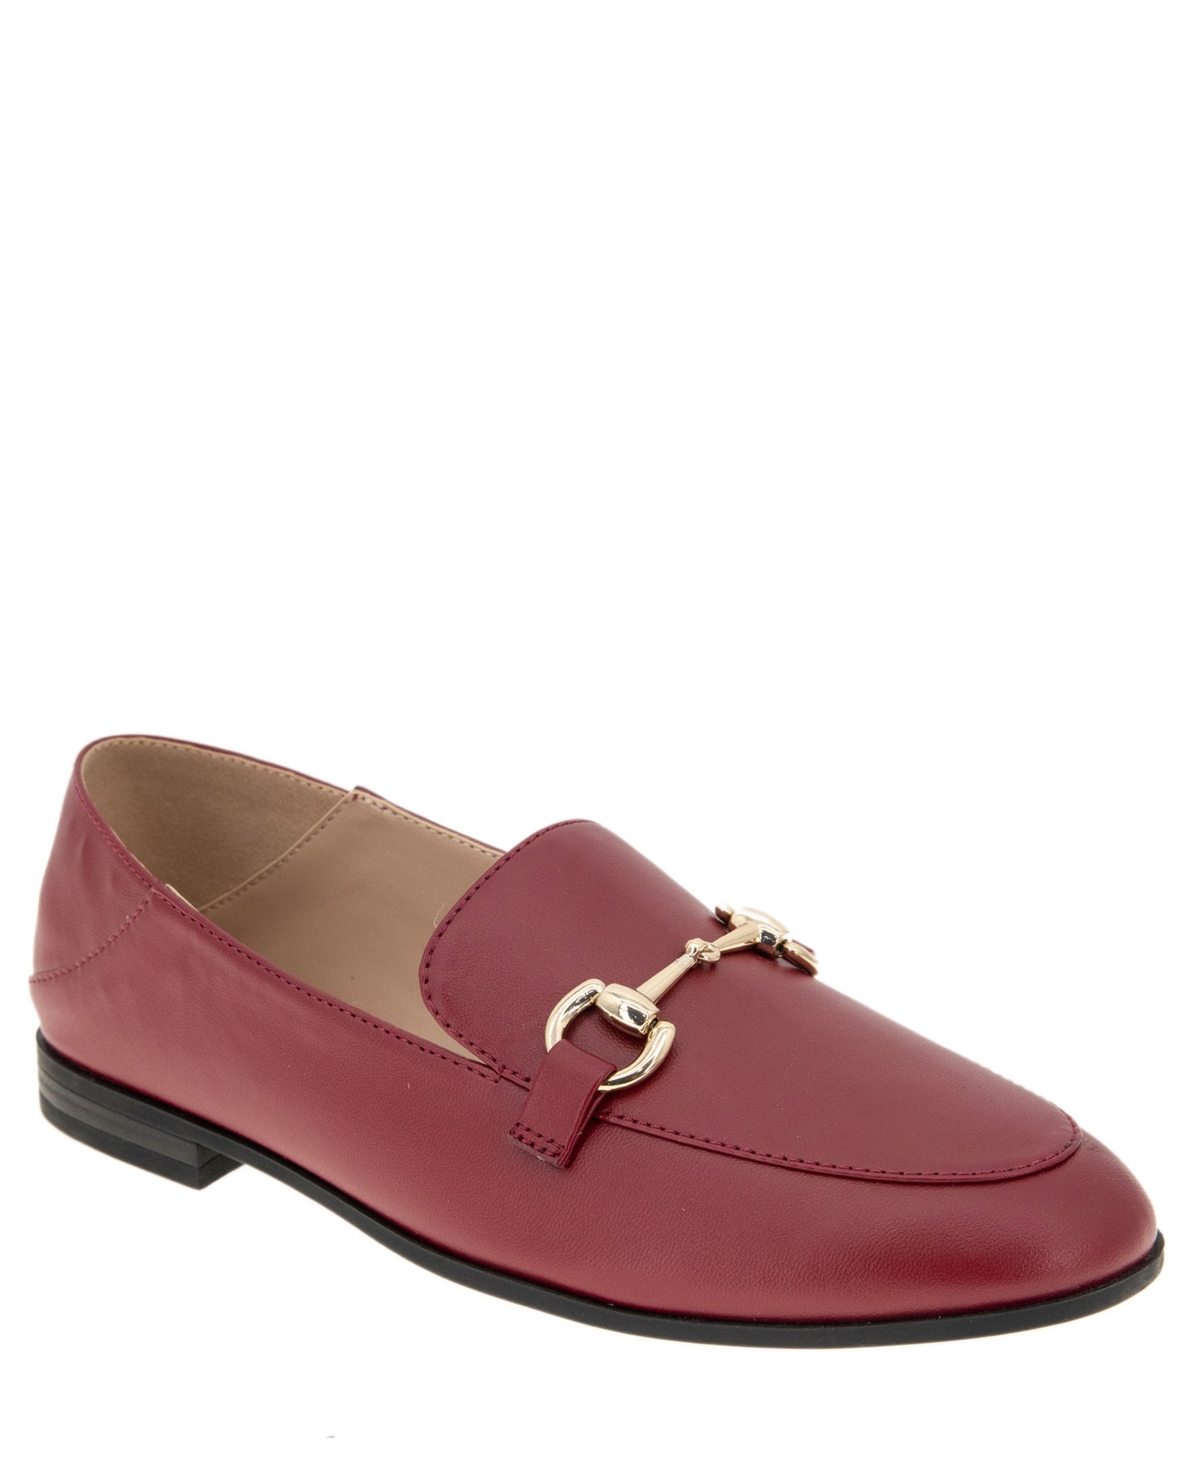 Women's Zeldi Convertible Loafer - Rhubarb Leather